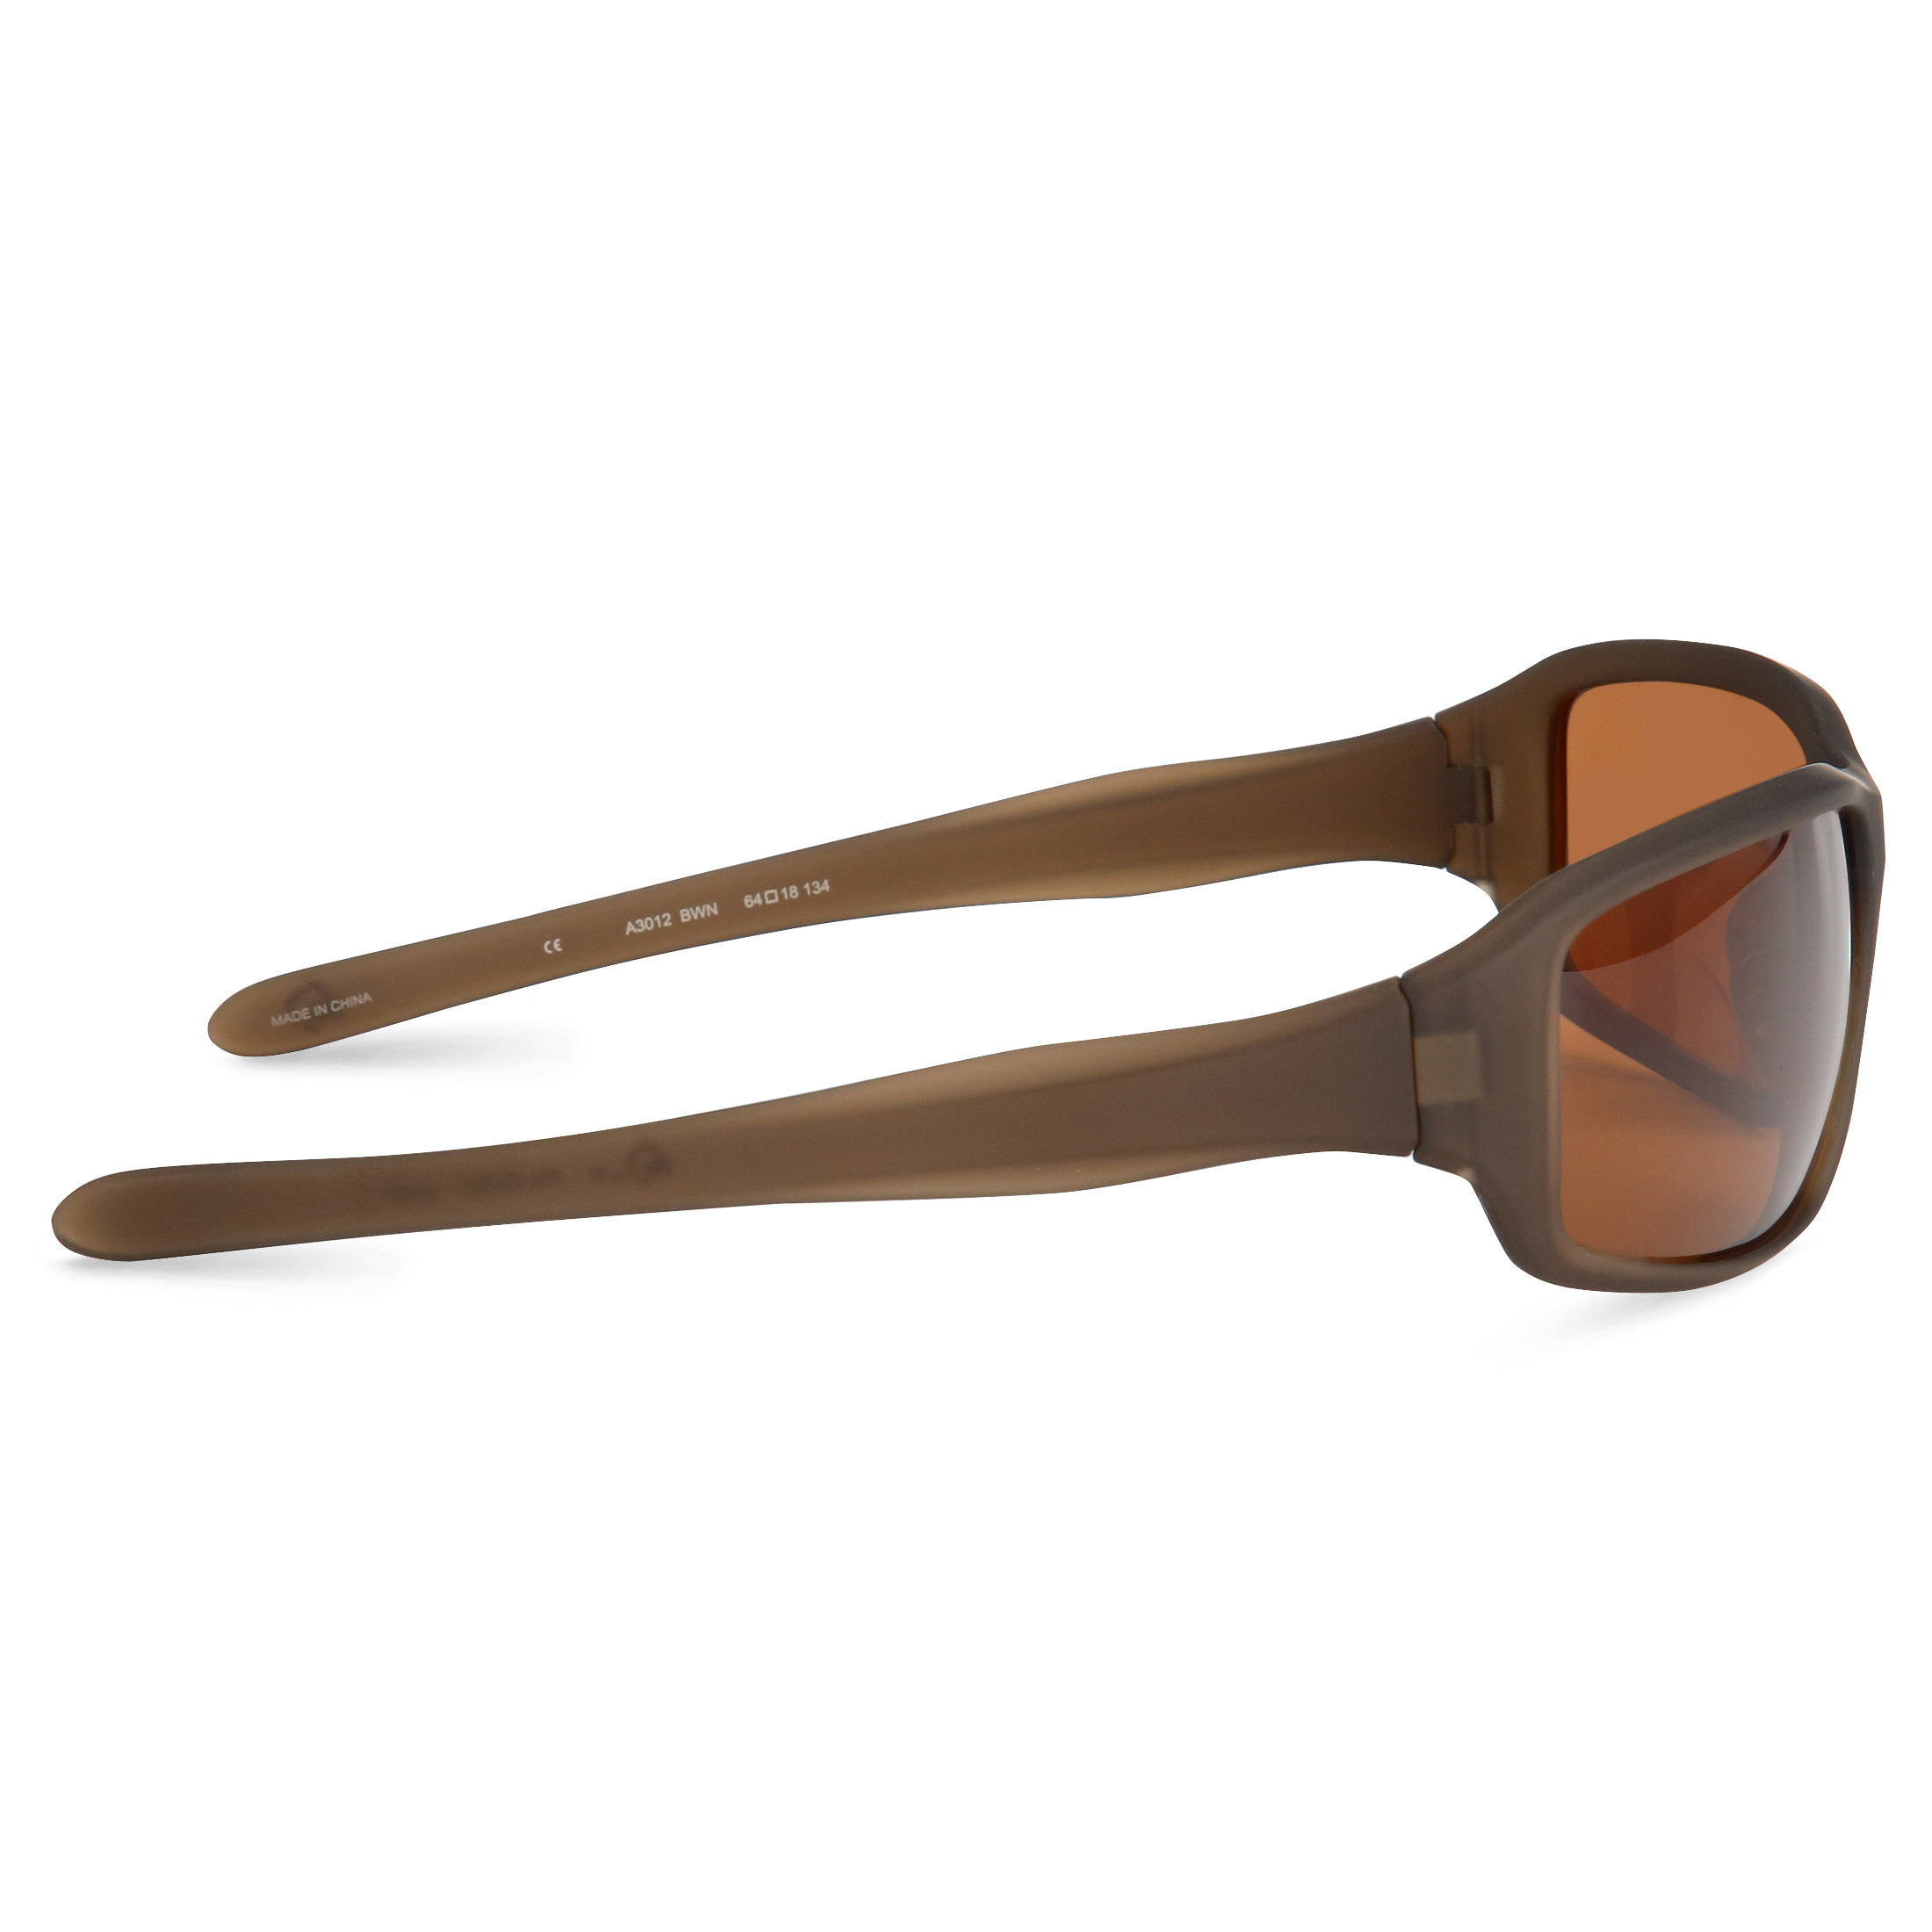 DNA Polarized Sunglasses, Unisex, A3012, Brown, 64-18-134 - image 2 of 6